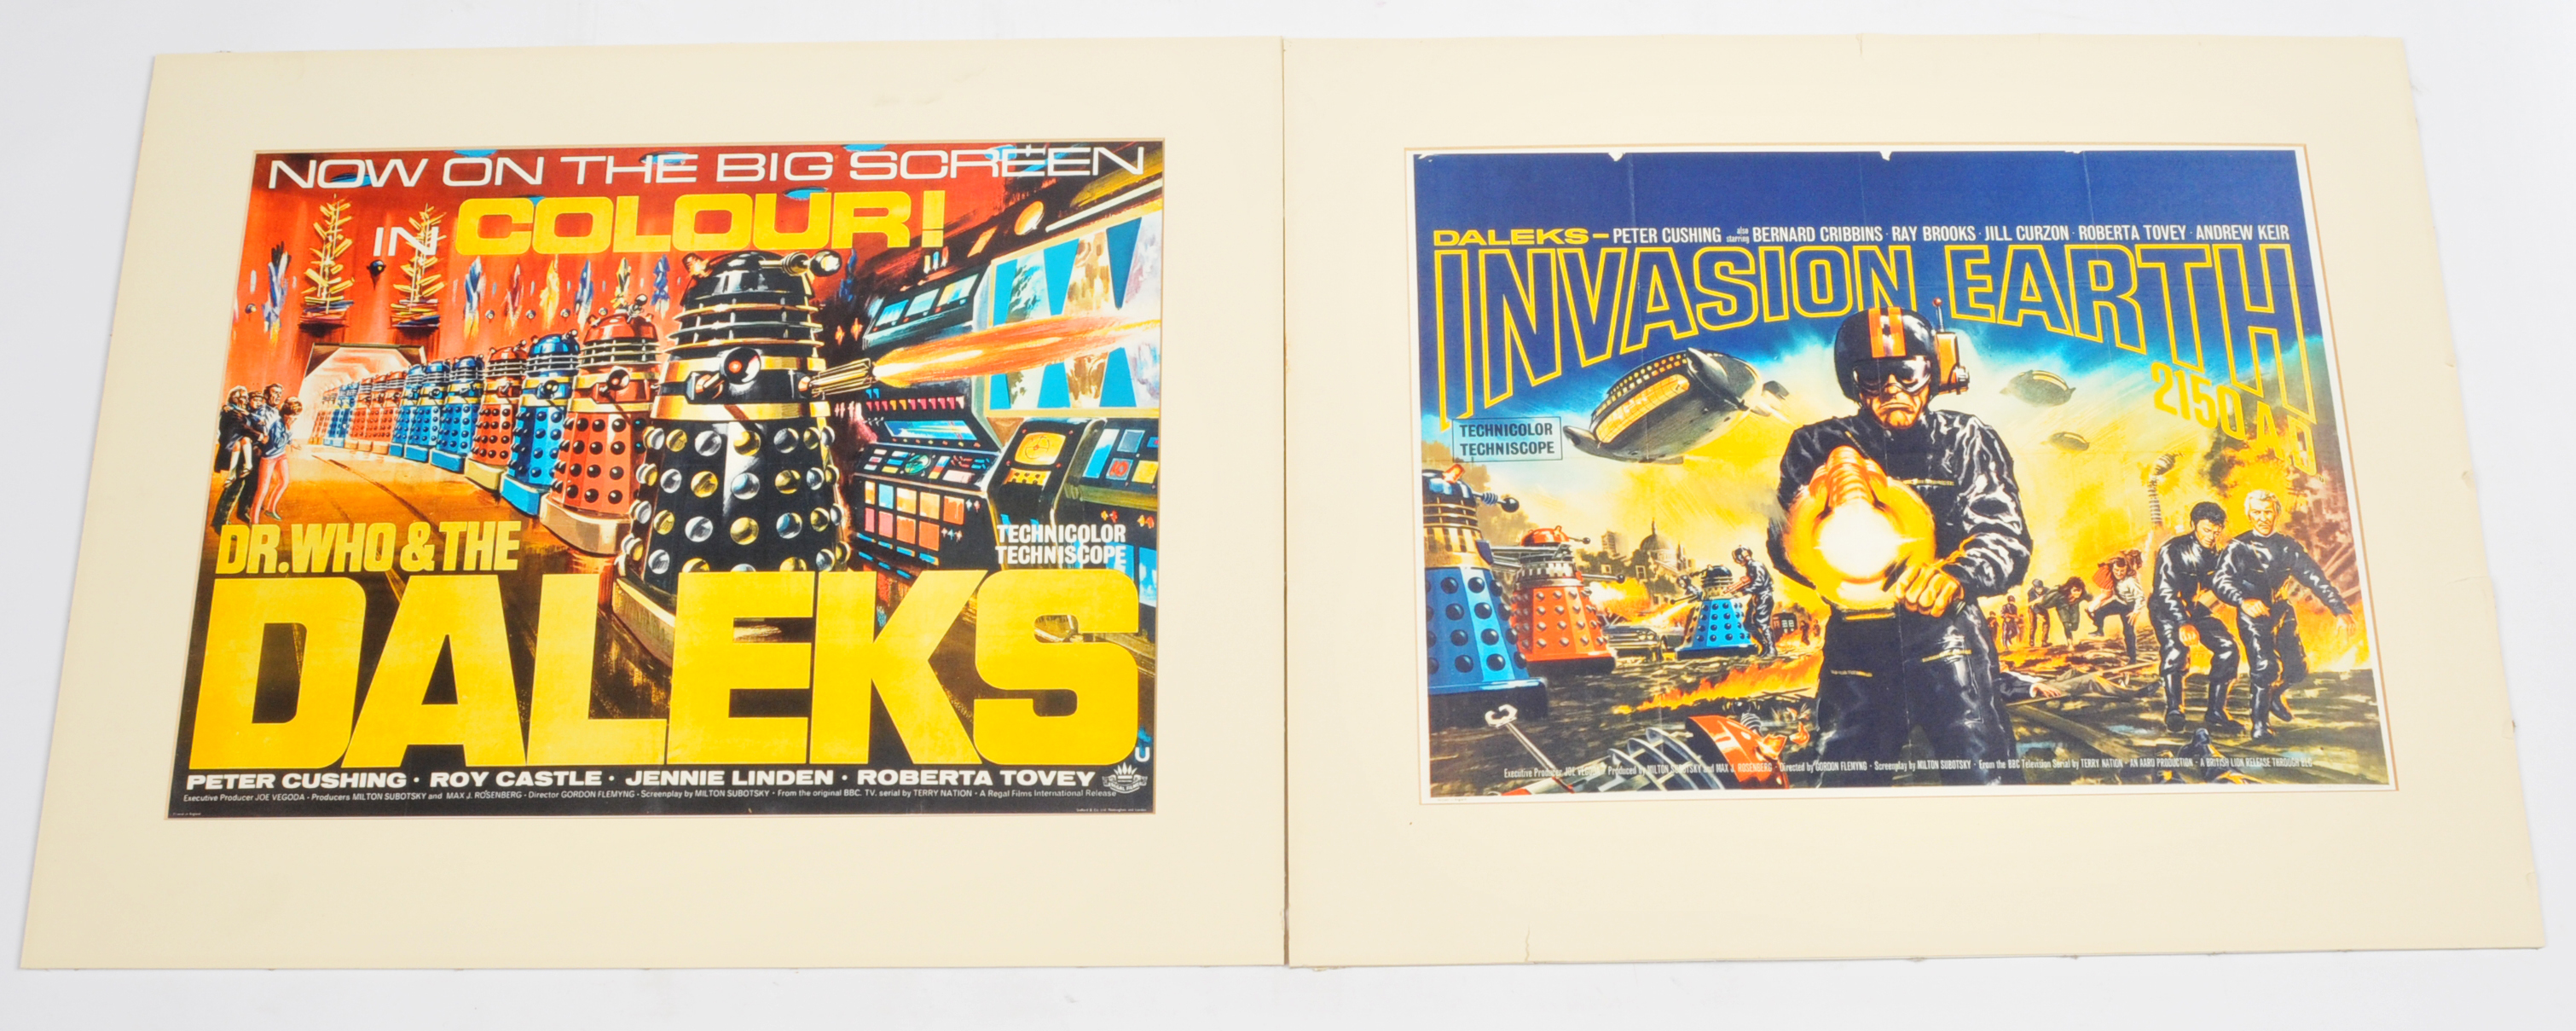 Doctor Who Daleks pair of photographic prints